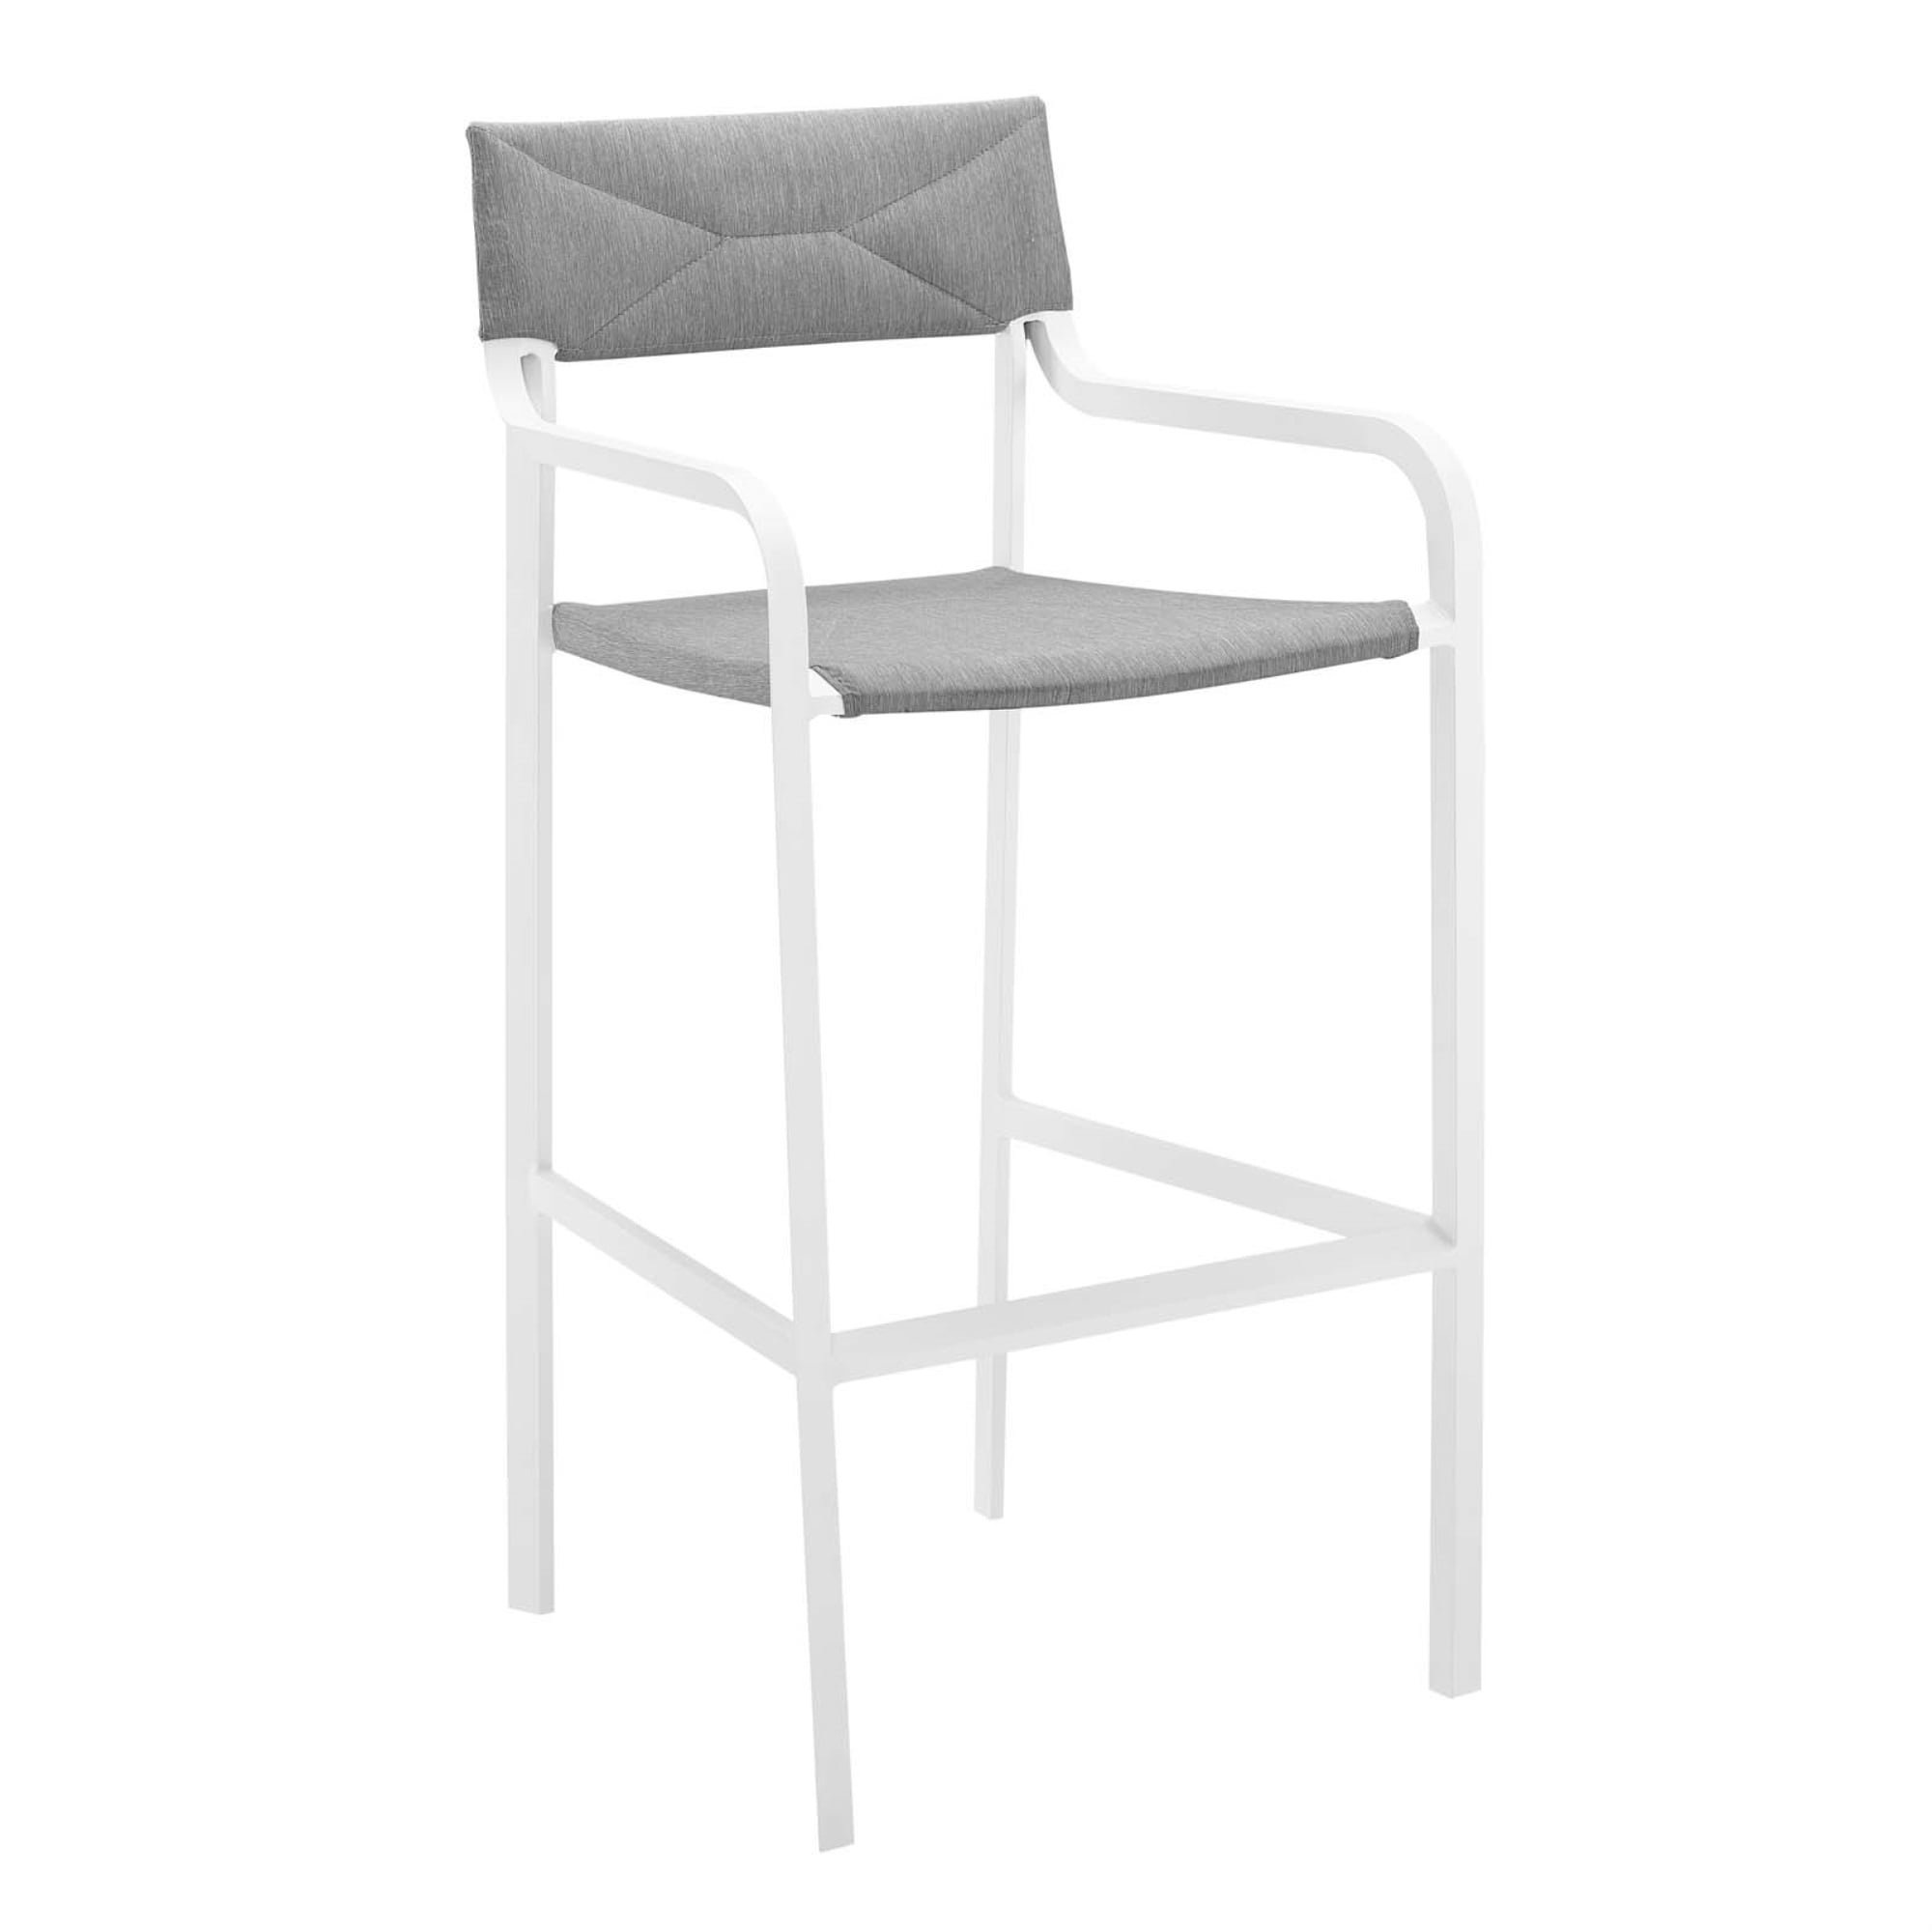 Raleigh Stackable Outdoor Patio, Outdoor Aluminum Bar Stools With Backs